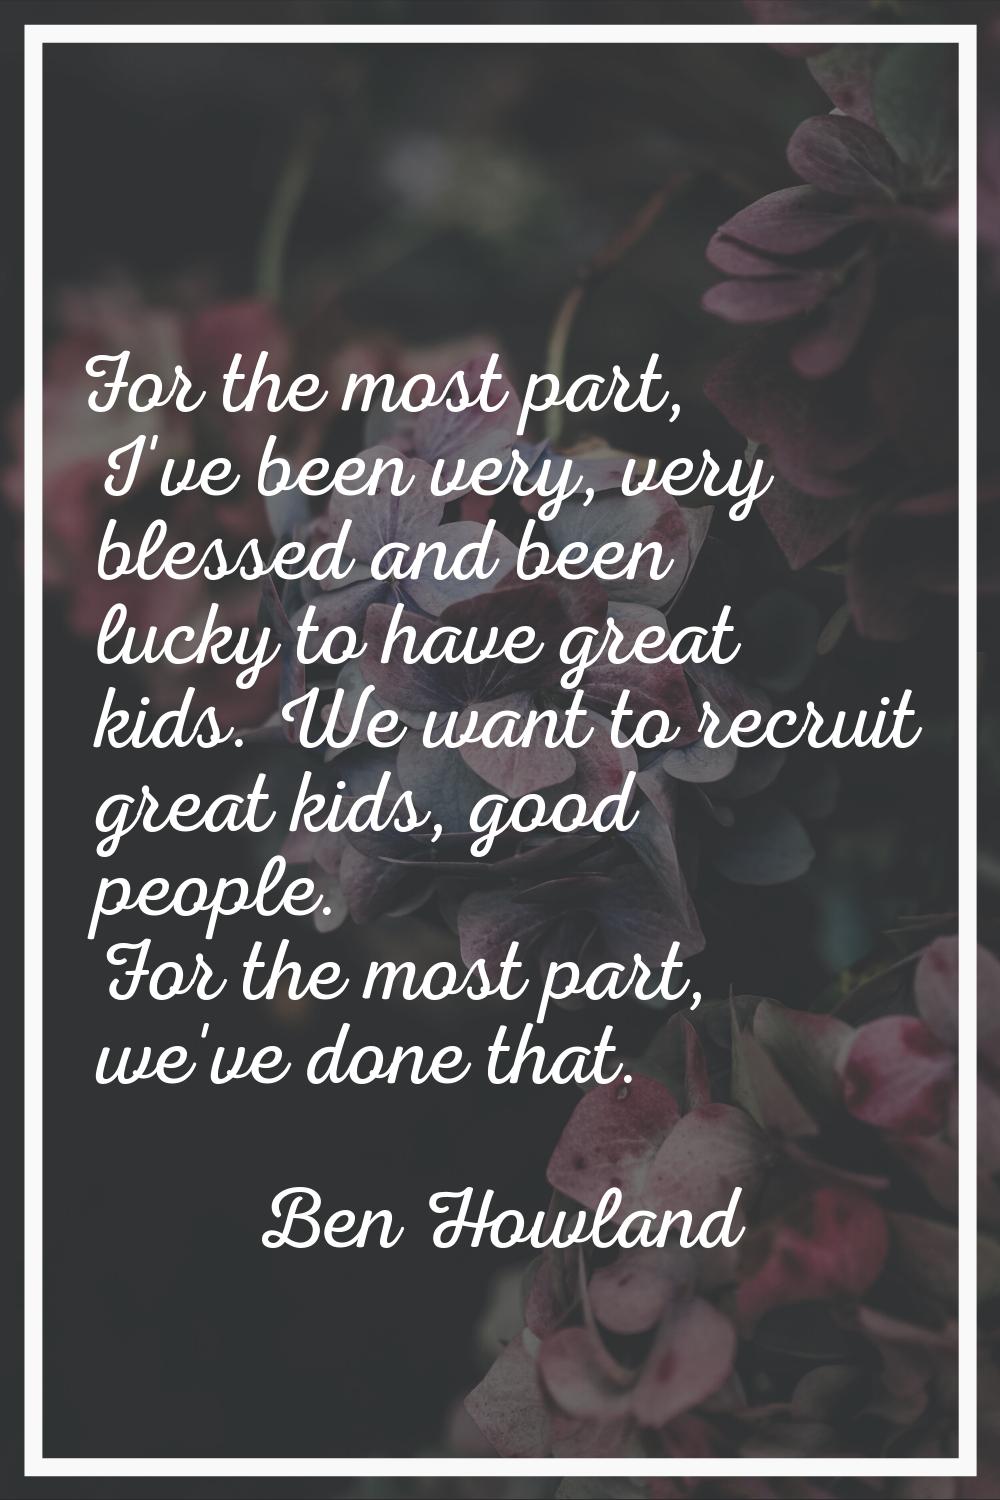 For the most part, I've been very, very blessed and been lucky to have great kids. We want to recru